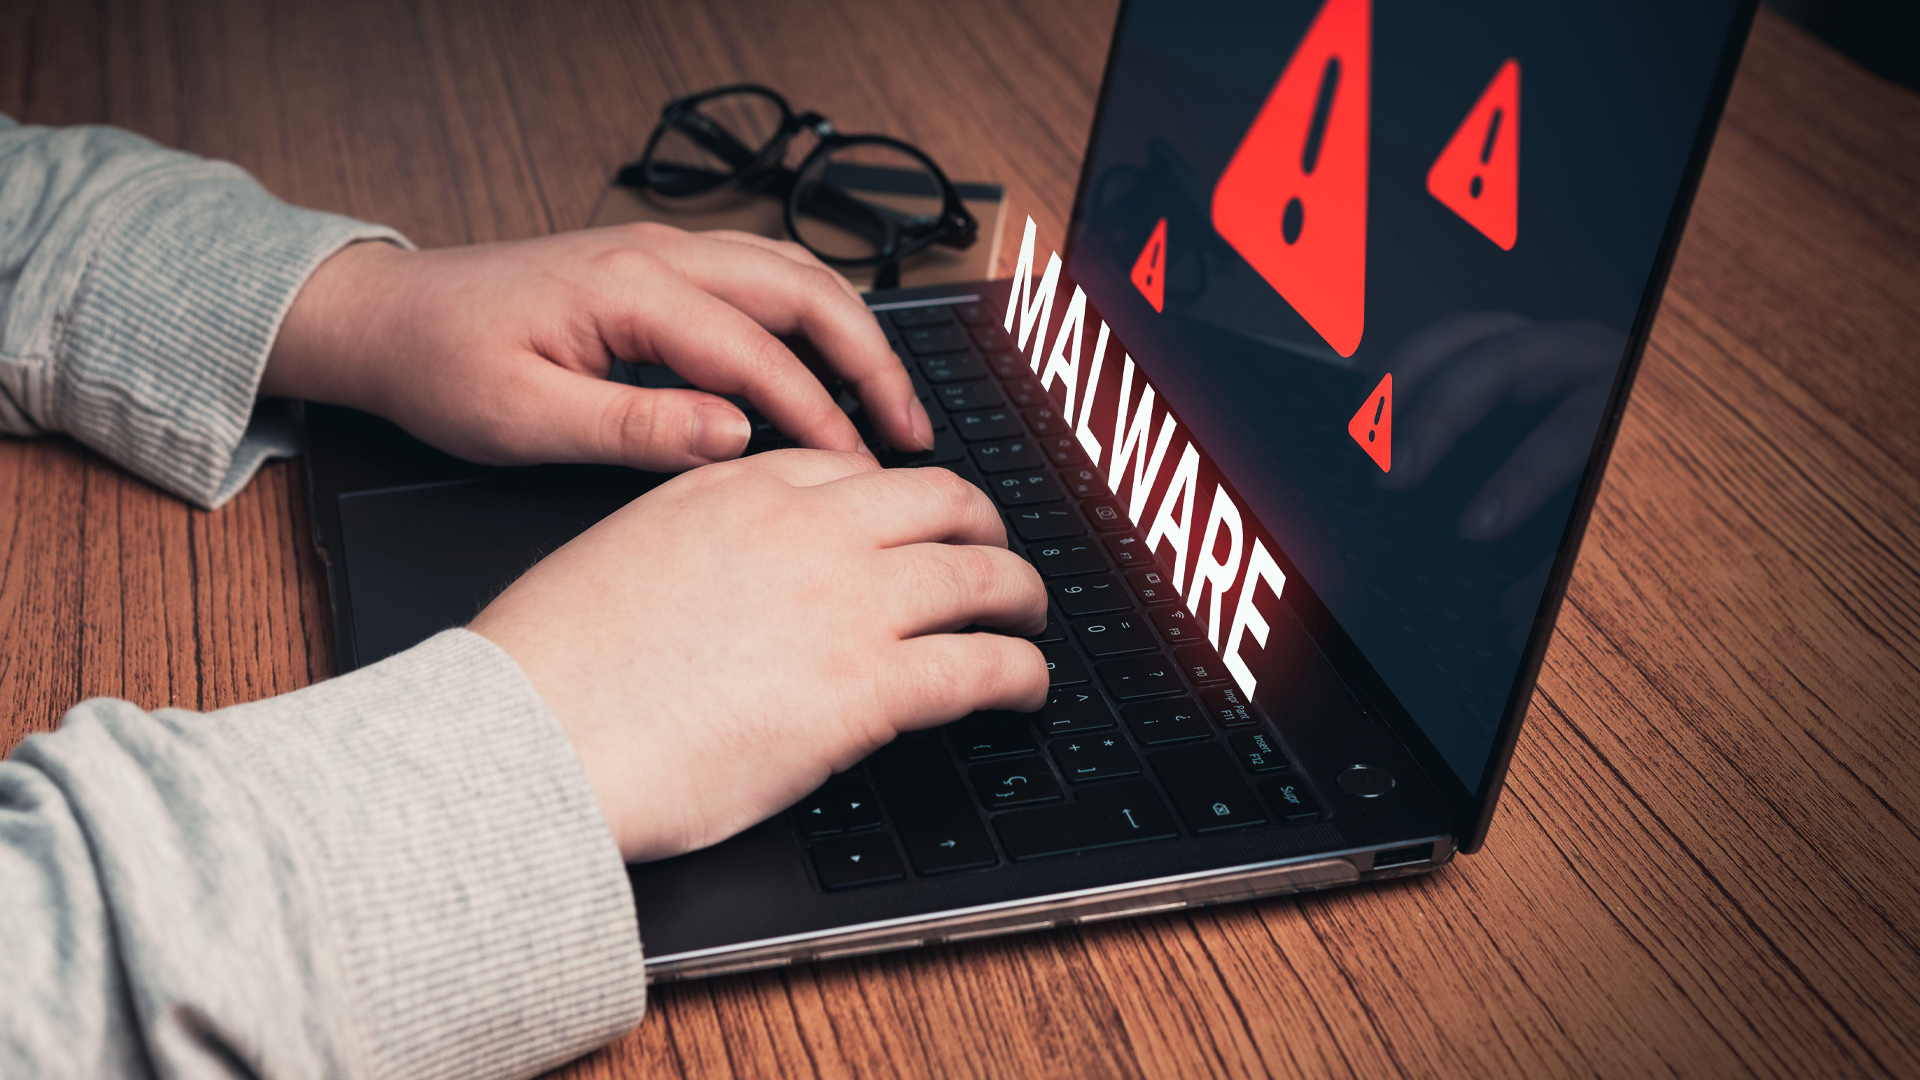 Expert tips to avoid falling for sinister website scam and secure your money with four simple checks